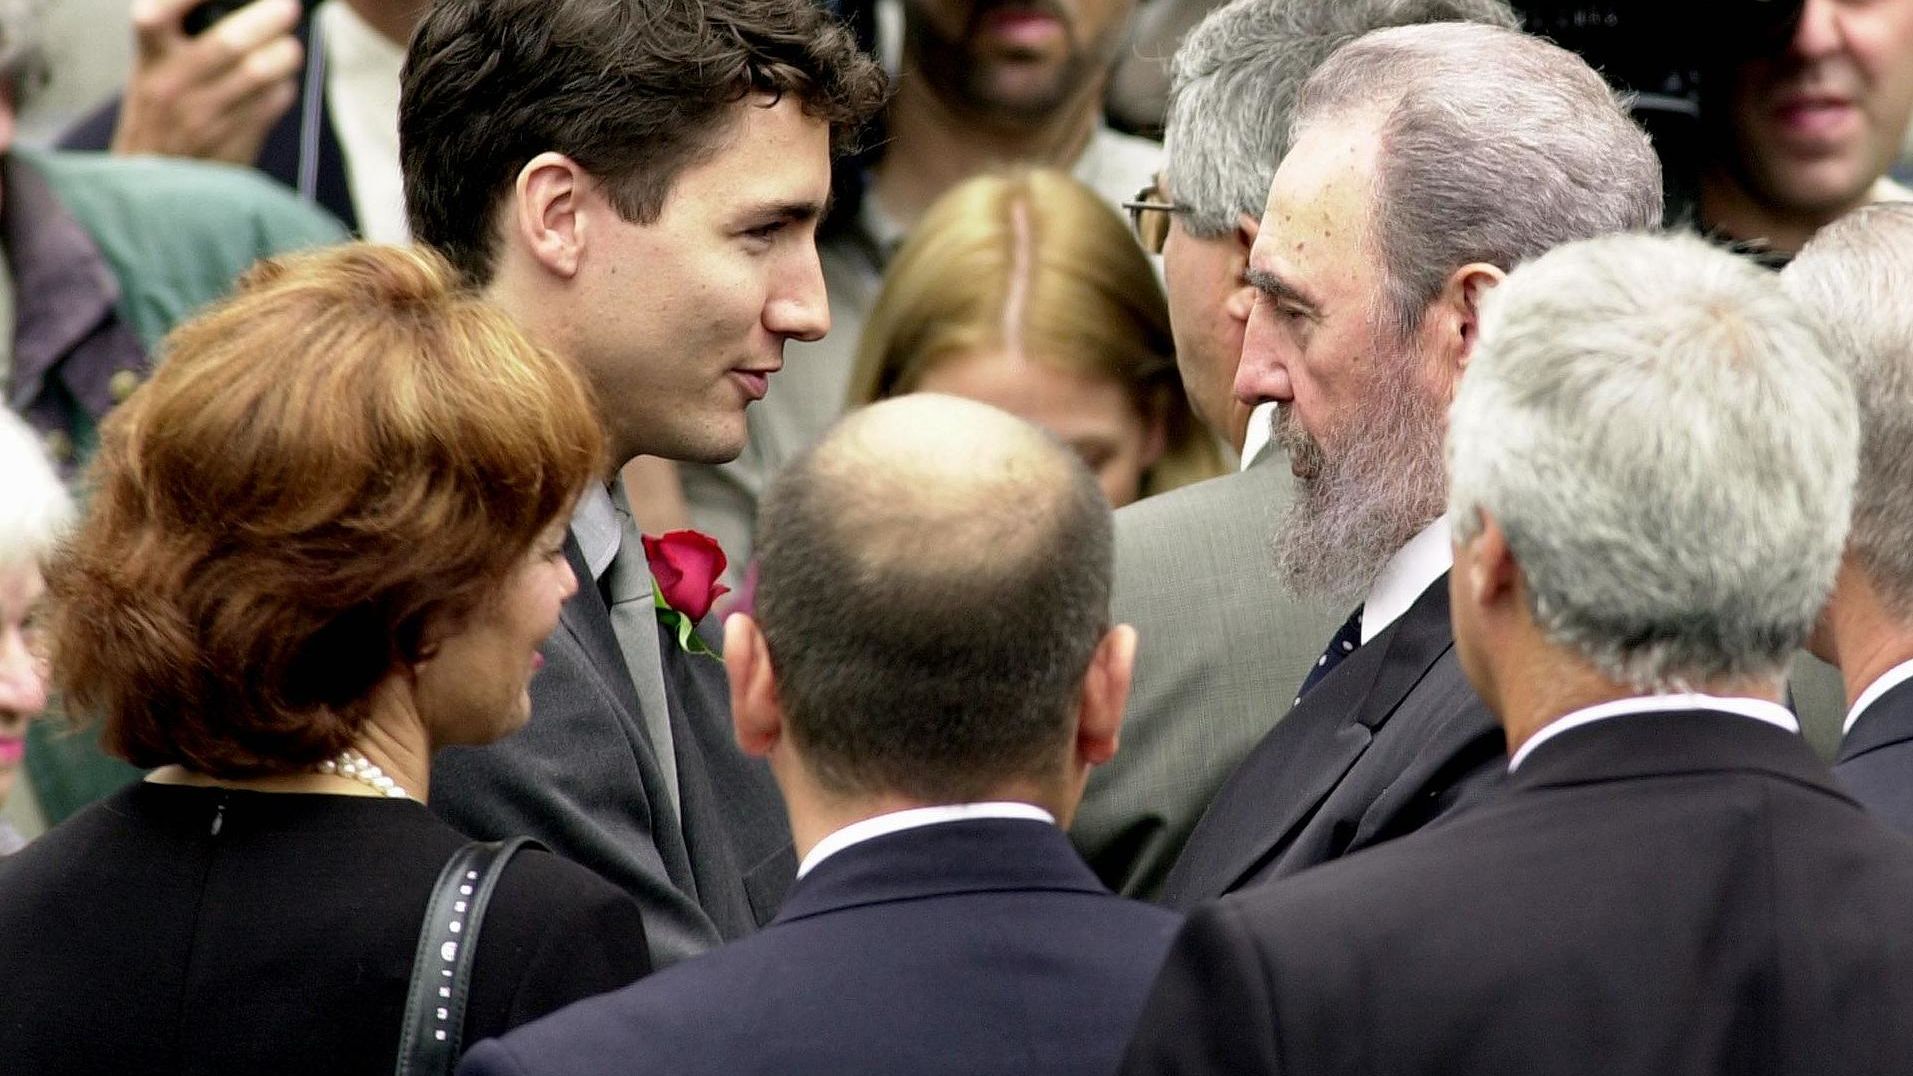 Fidel Castro greets Justin Trudeau at the former Canadian Prime Minister Pierre Trudeau's state funeral on October 3, 2000.